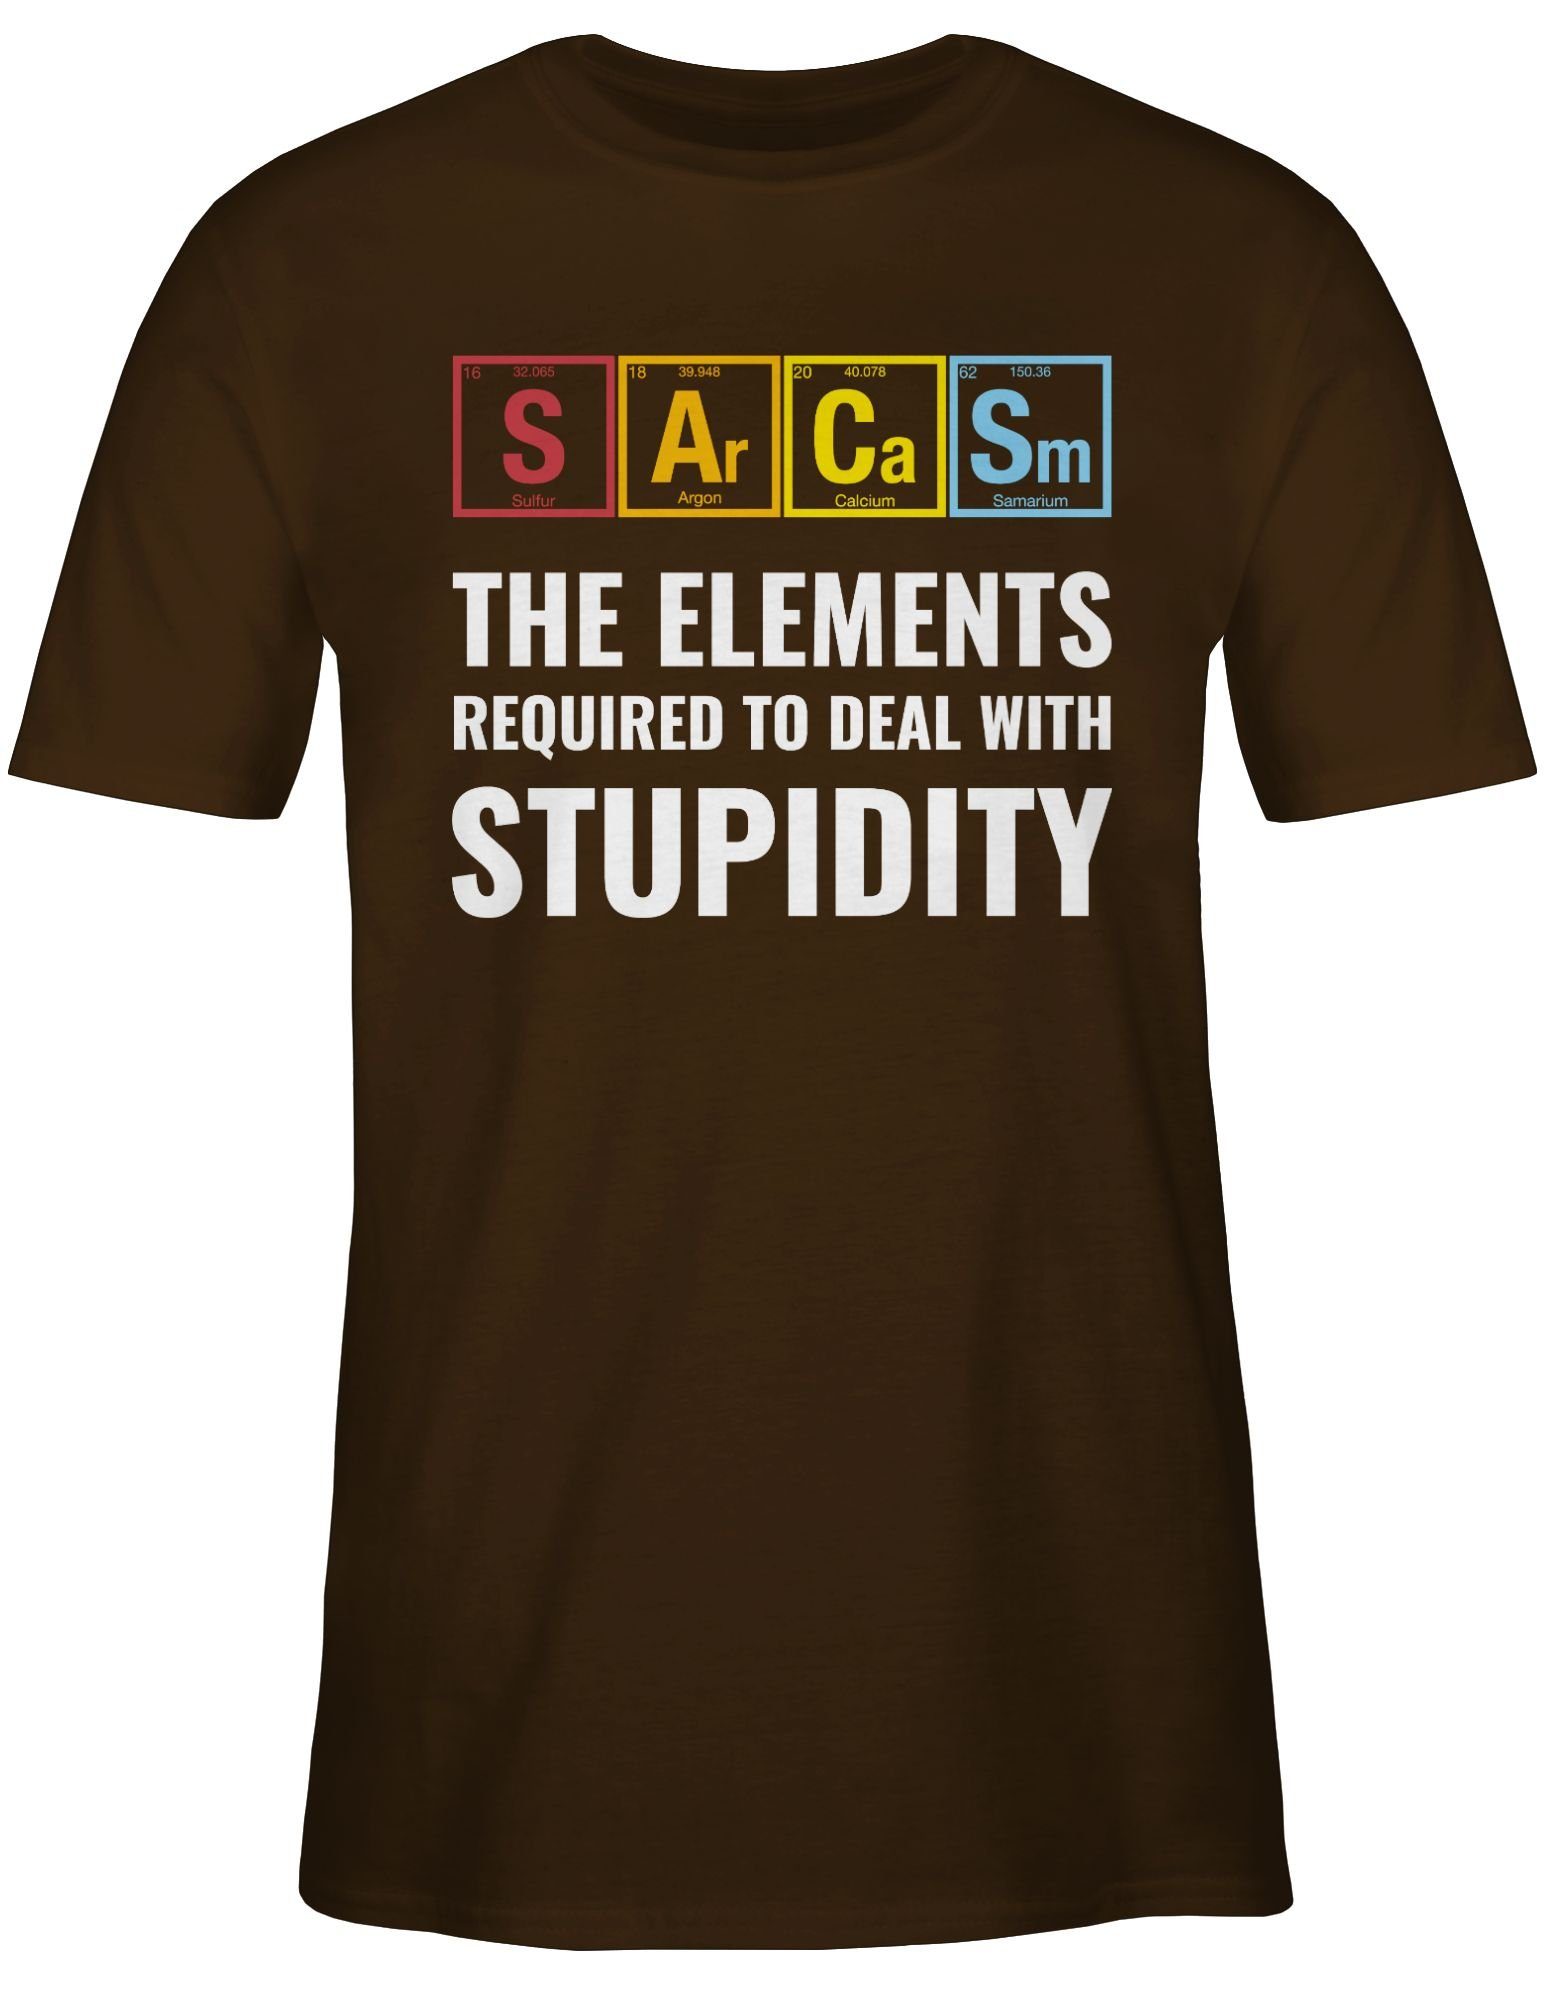 Braun Shirtracer - stupidity the to T-Shirt 02 with Geschenke required elements Nerd deal Sarcasm